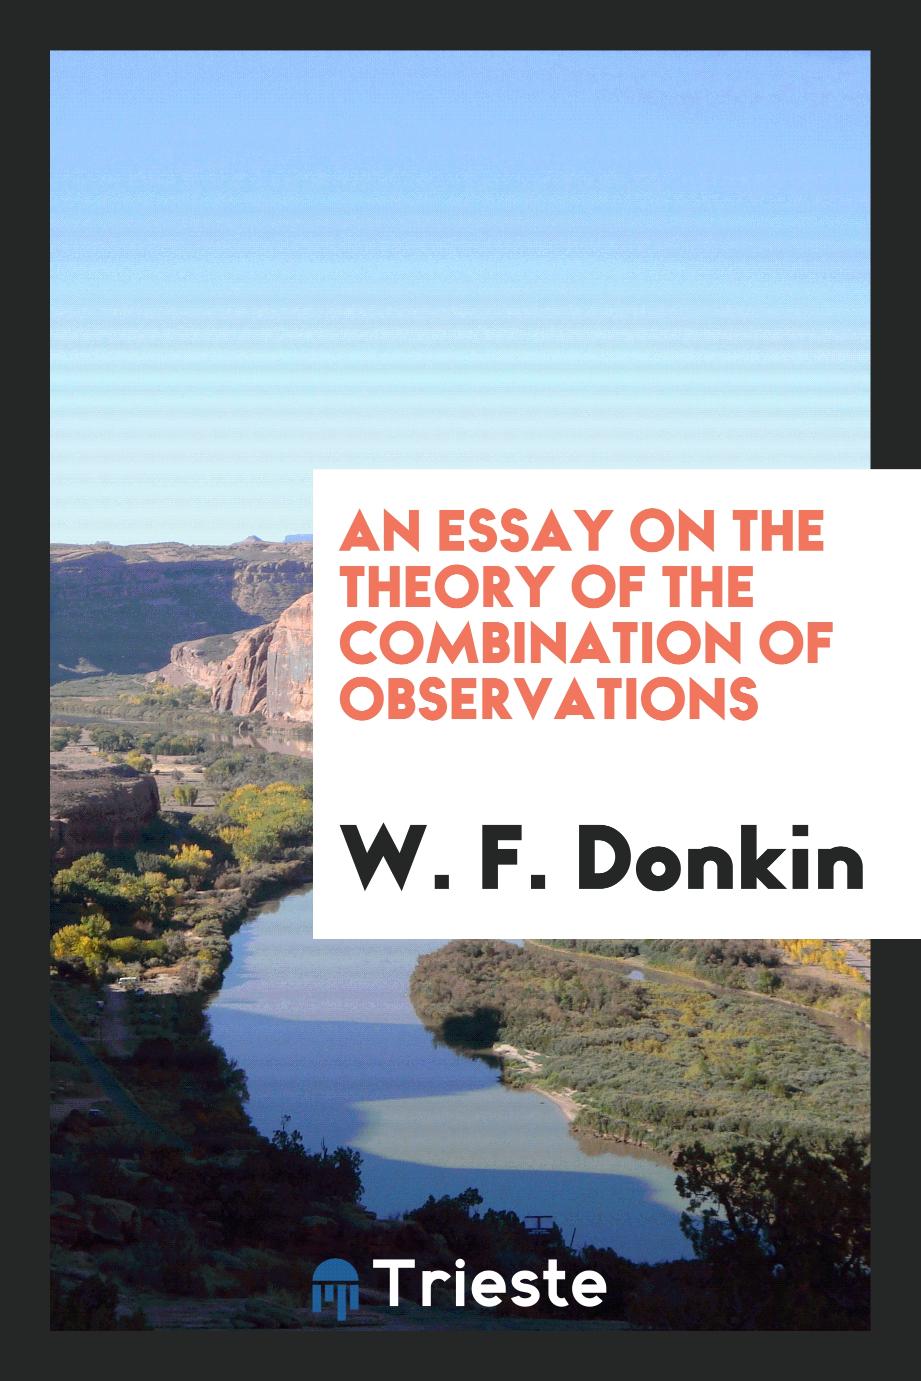 An Essay on the Theory of the Combination of Observations